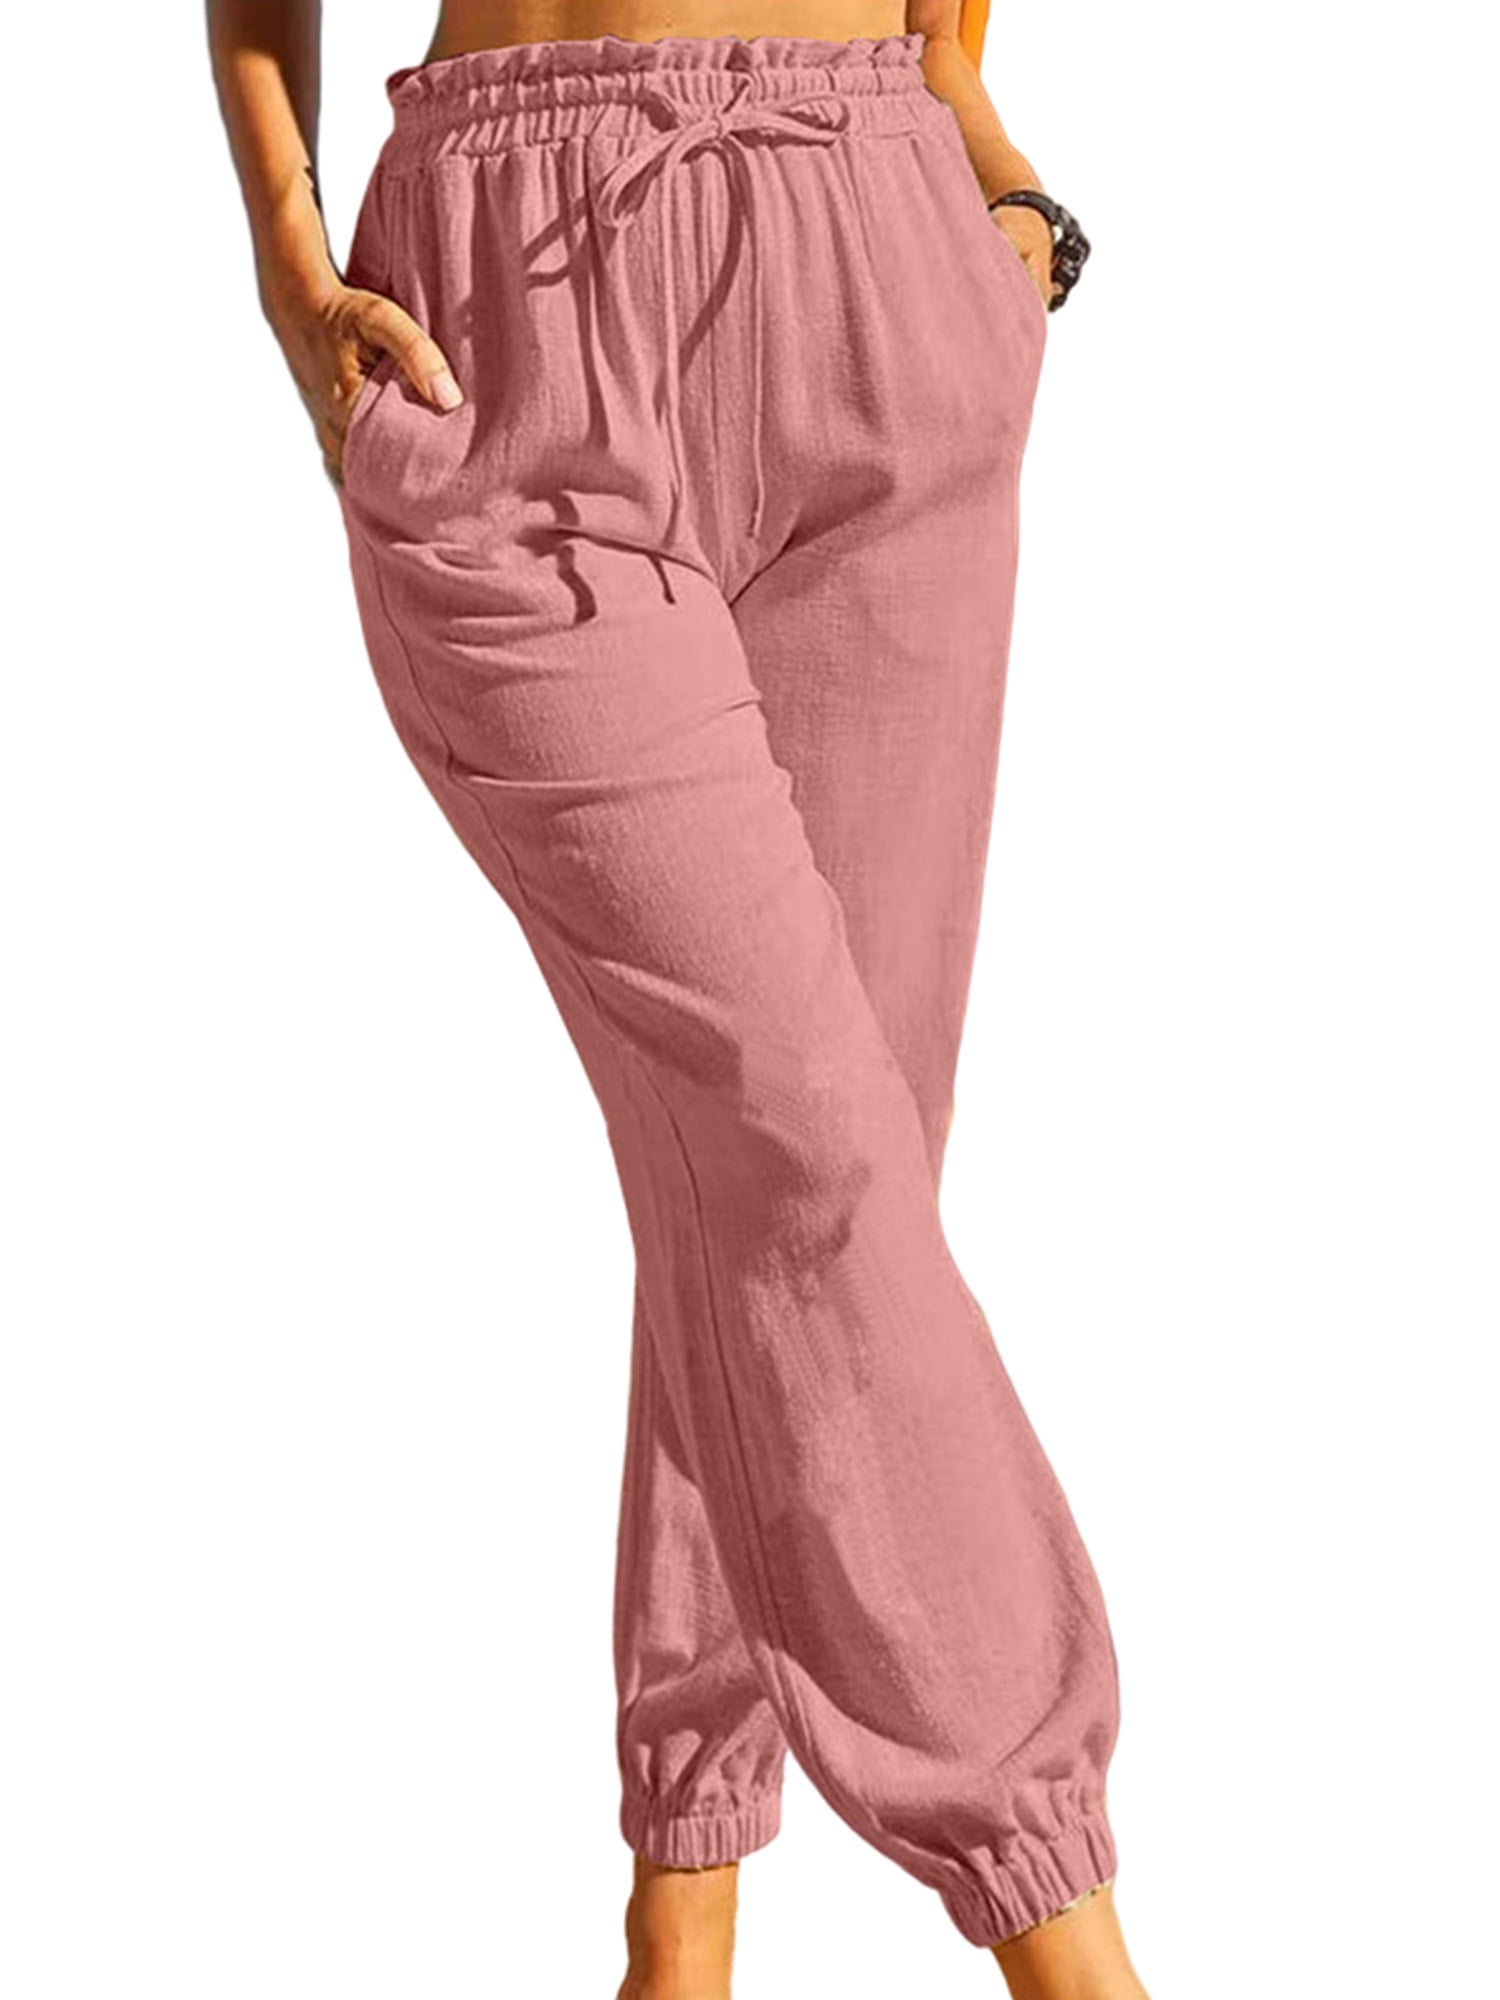 Grianlook Casual Beach Pants For Women's Joggers Pants Drawstring Running  Sweatpants with Pockets Lounge Wear Linen Straight Crop Pants